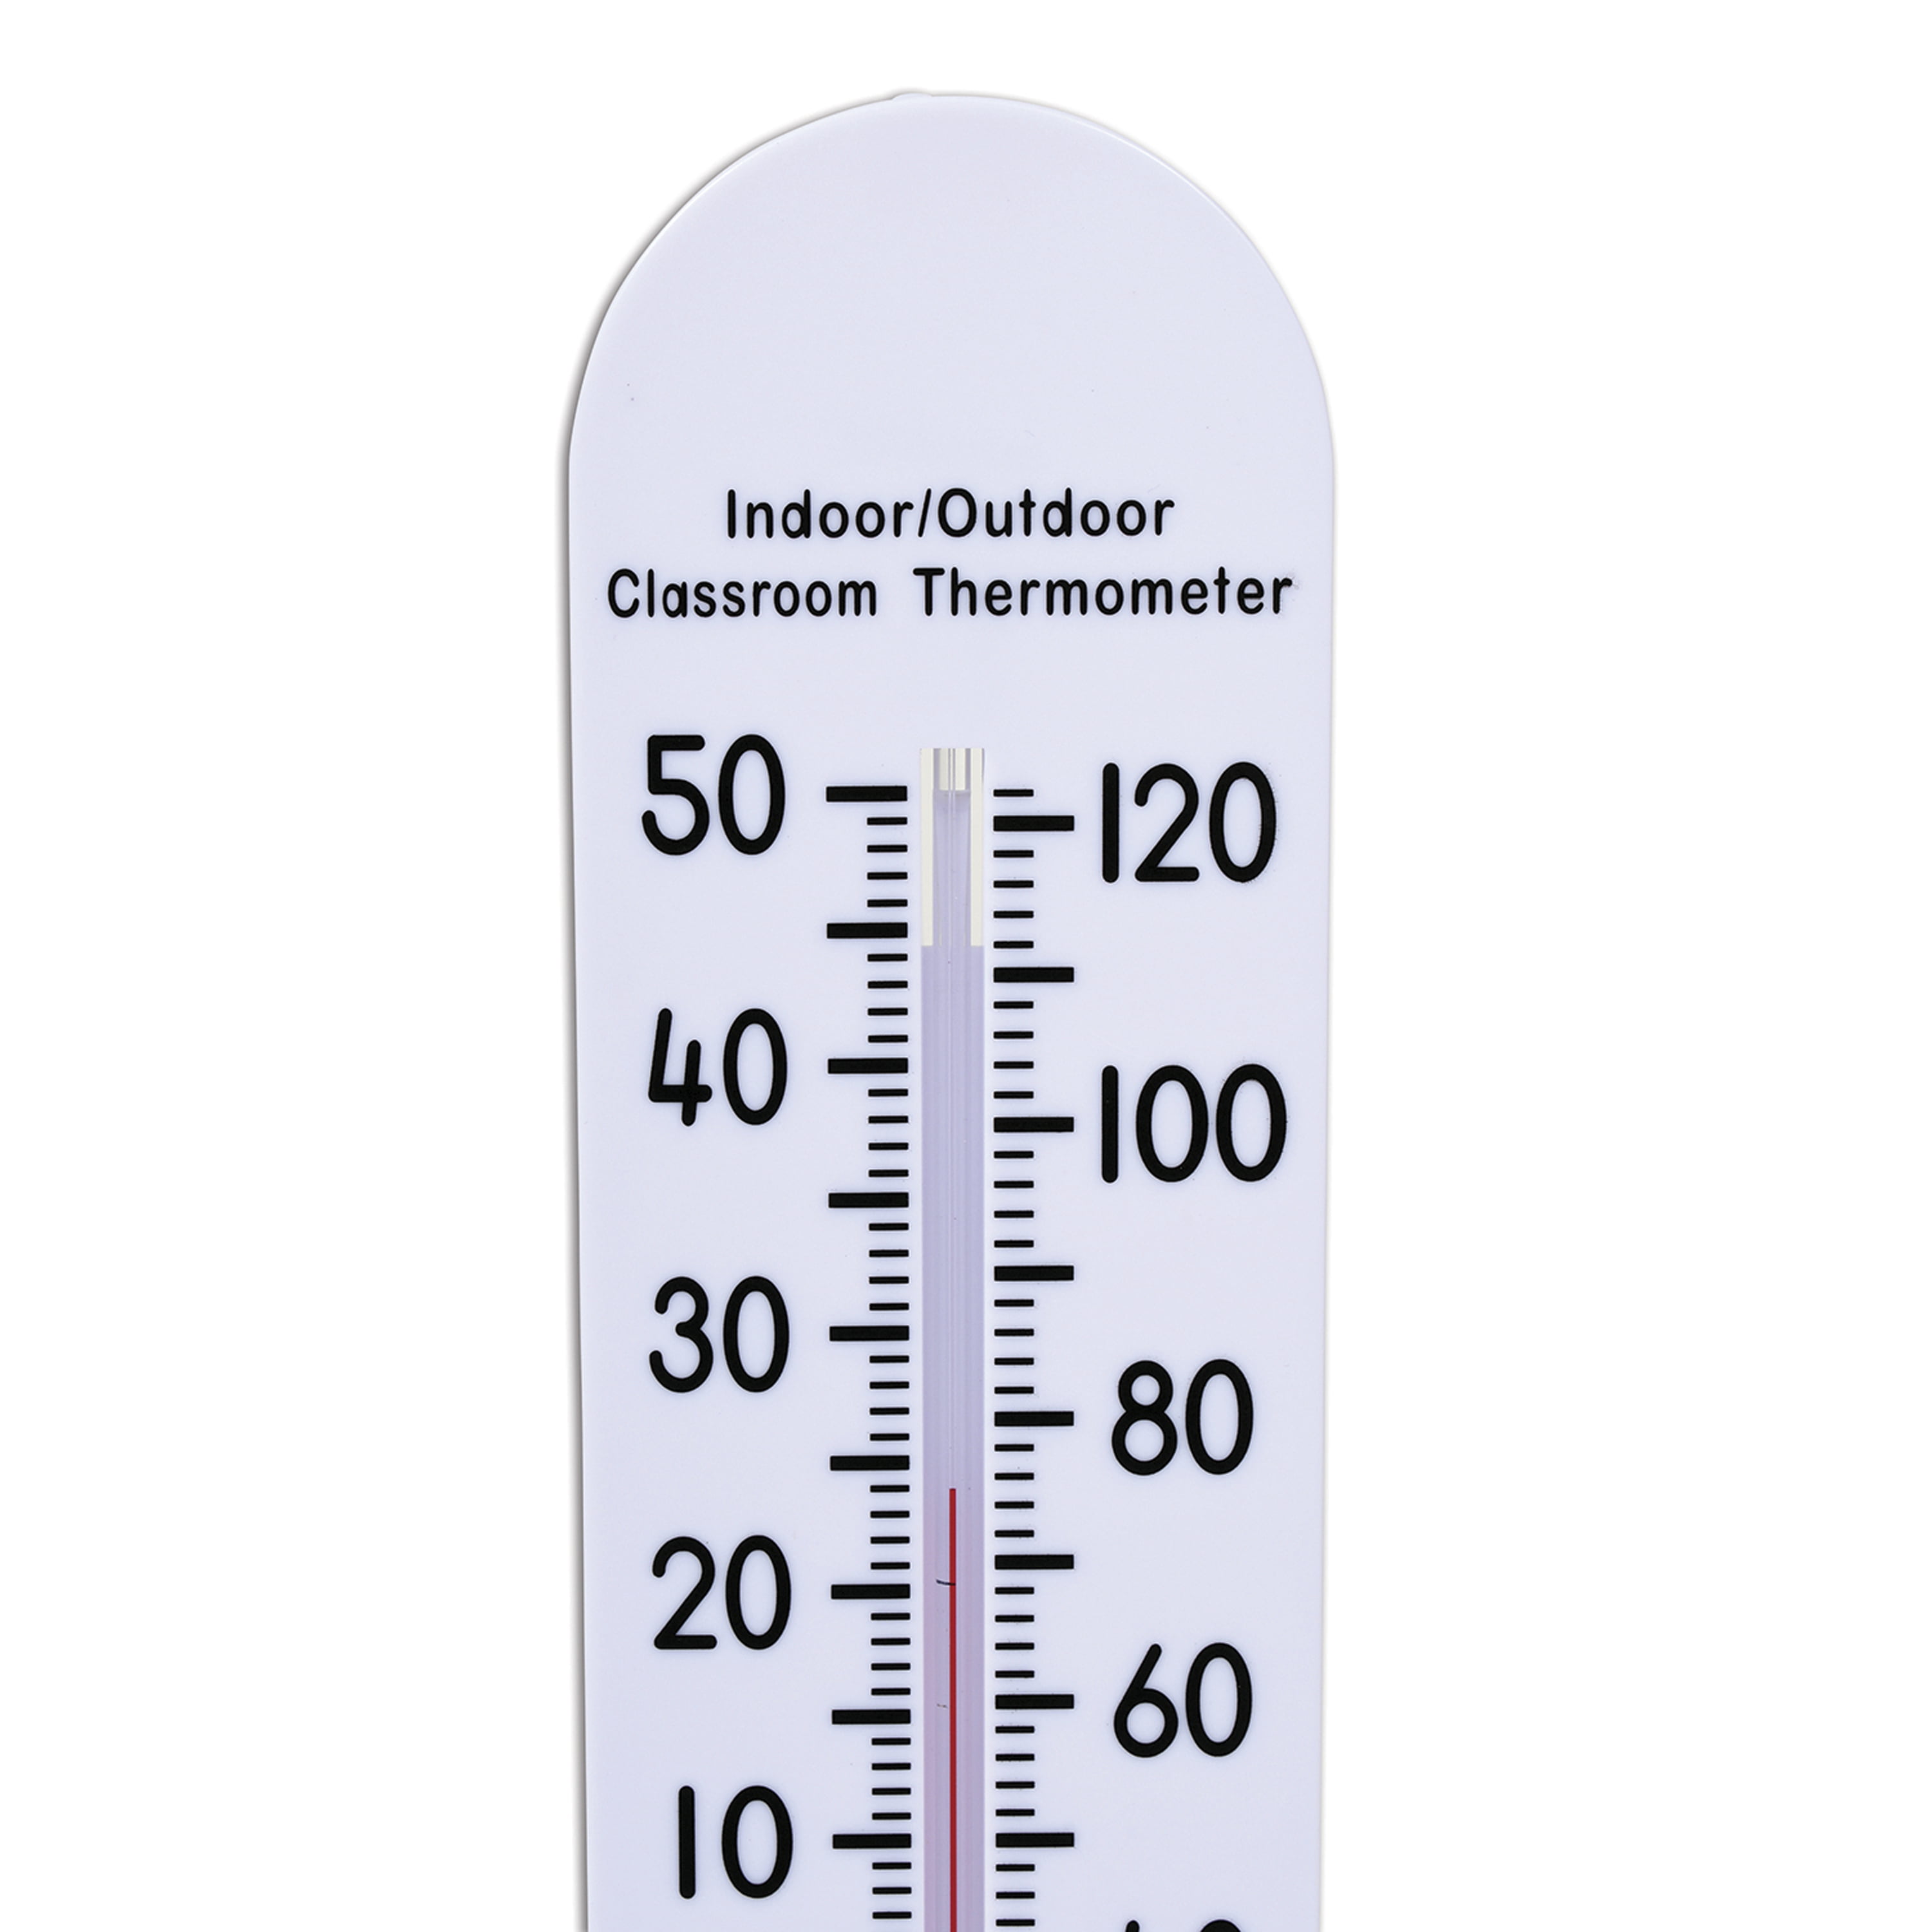 Learning Advantage Indoor / Outdoor Classroom Thermometer